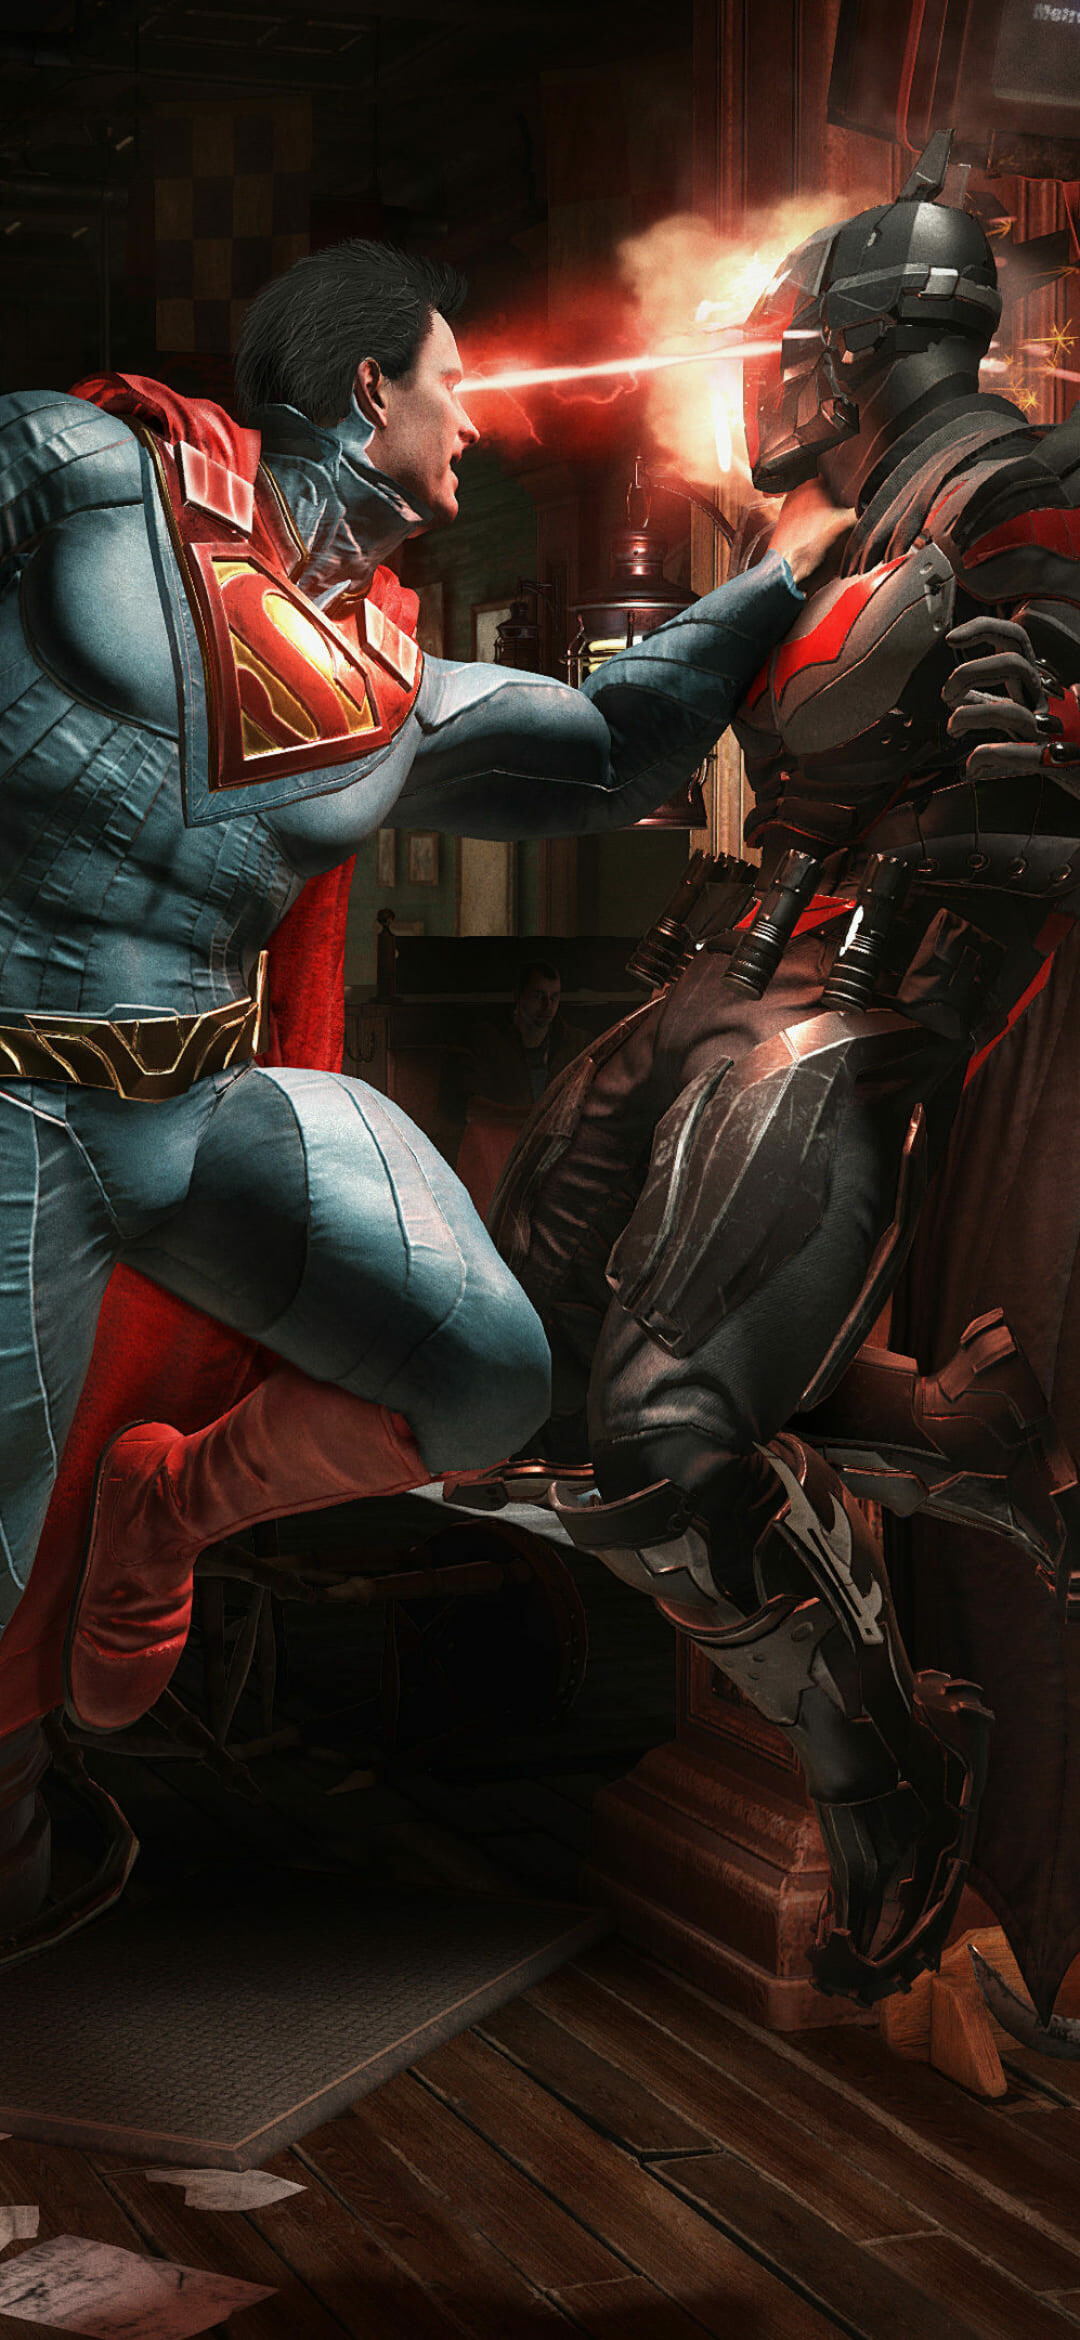 Injustice: A fighting game that blends classic Arcade style gameplay mechanics with an intriguing storyline that pits classic DC Comics. 1080x2340 HD Wallpaper.